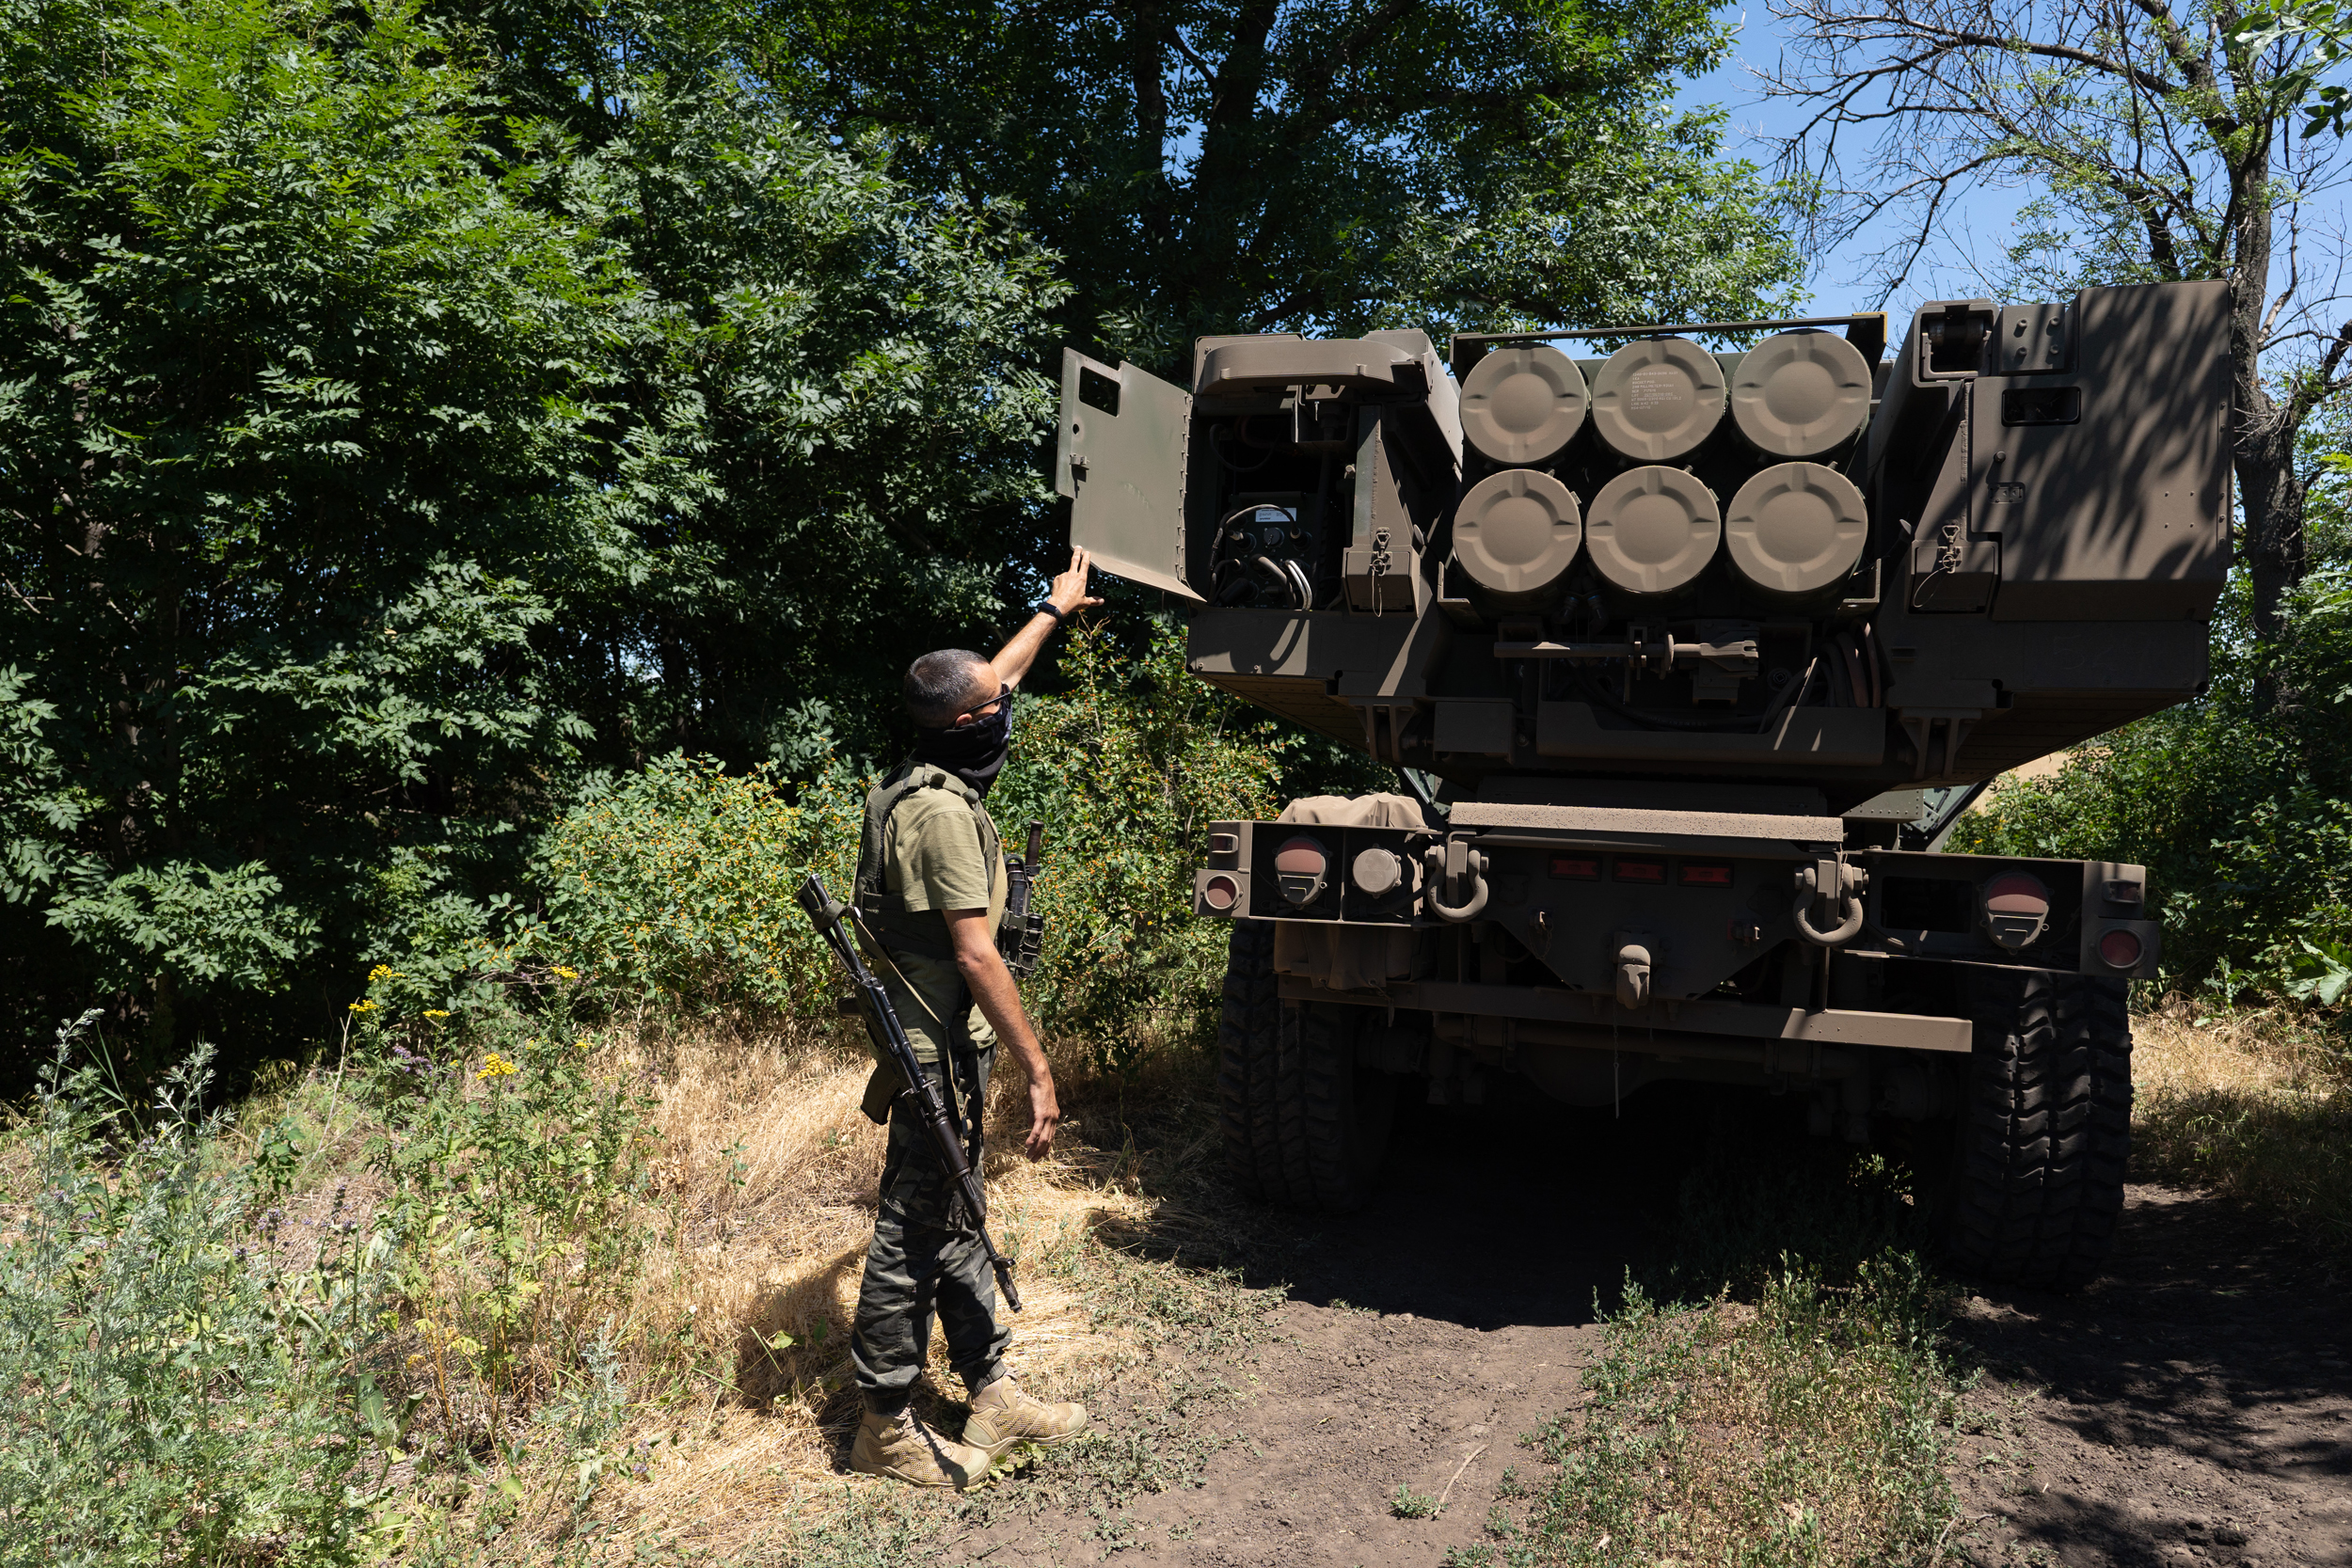 Ukrainian Counter Offensive Troops Are Cutting The Supply Lines Into Bakhmut